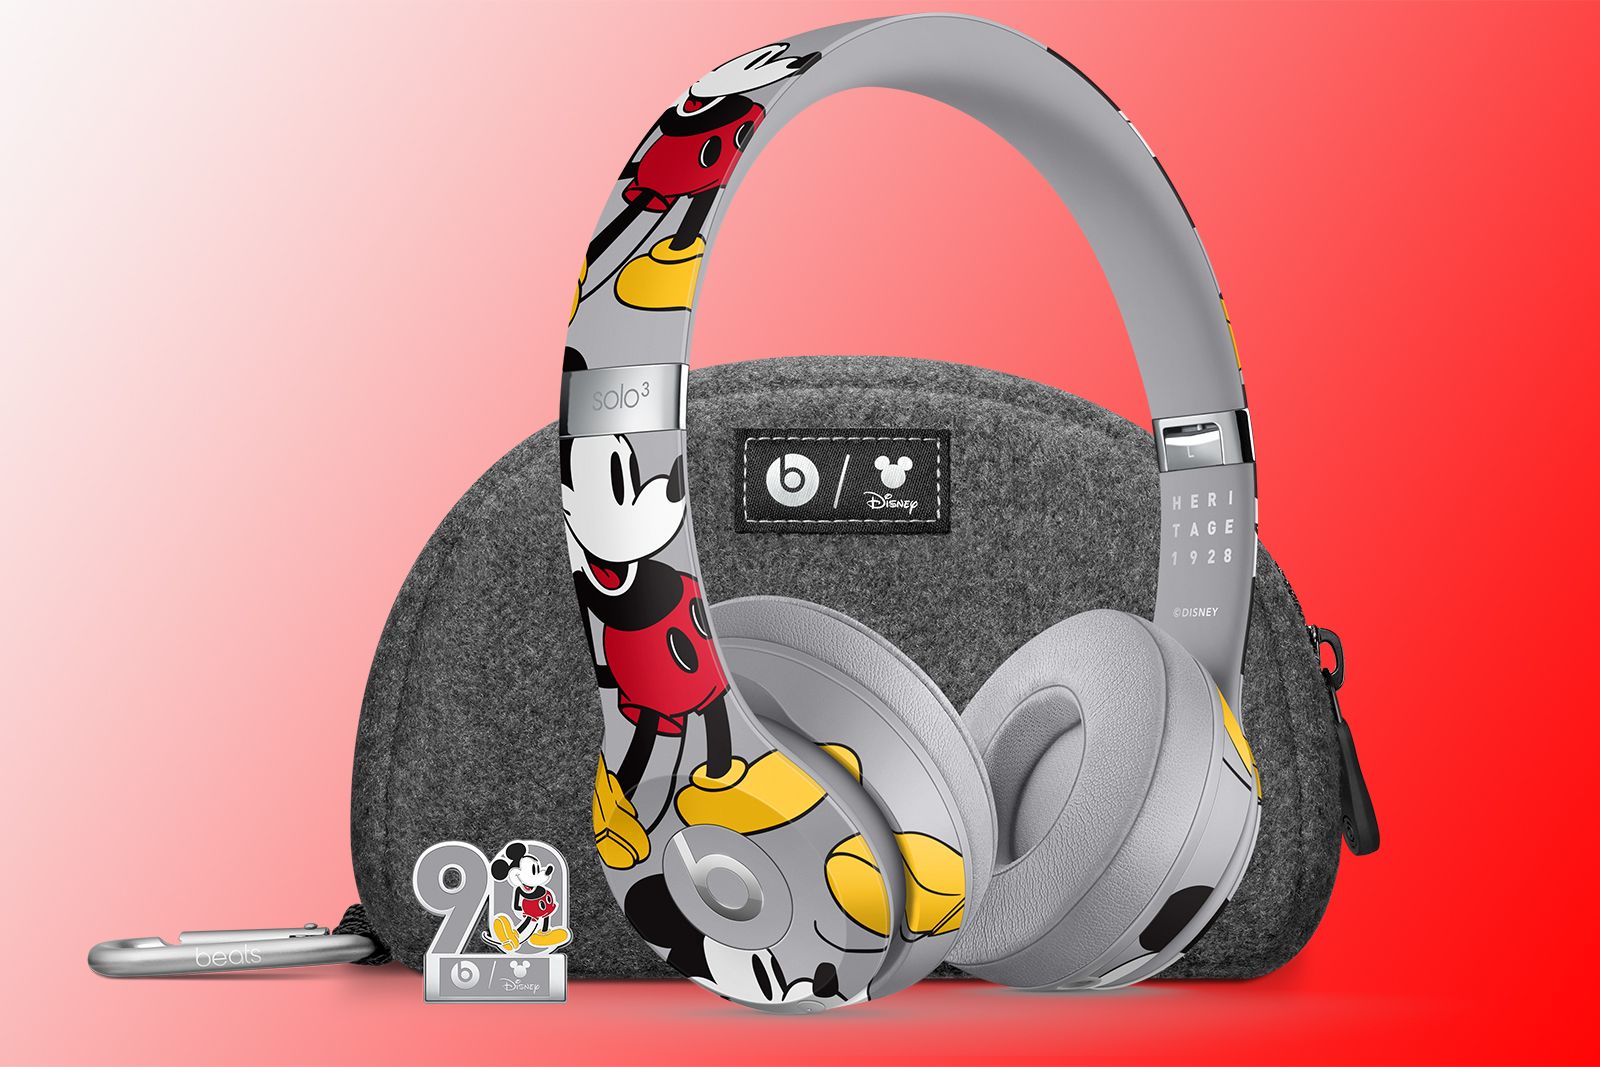 Mickey Mouse Beats could be coolest headphones ever